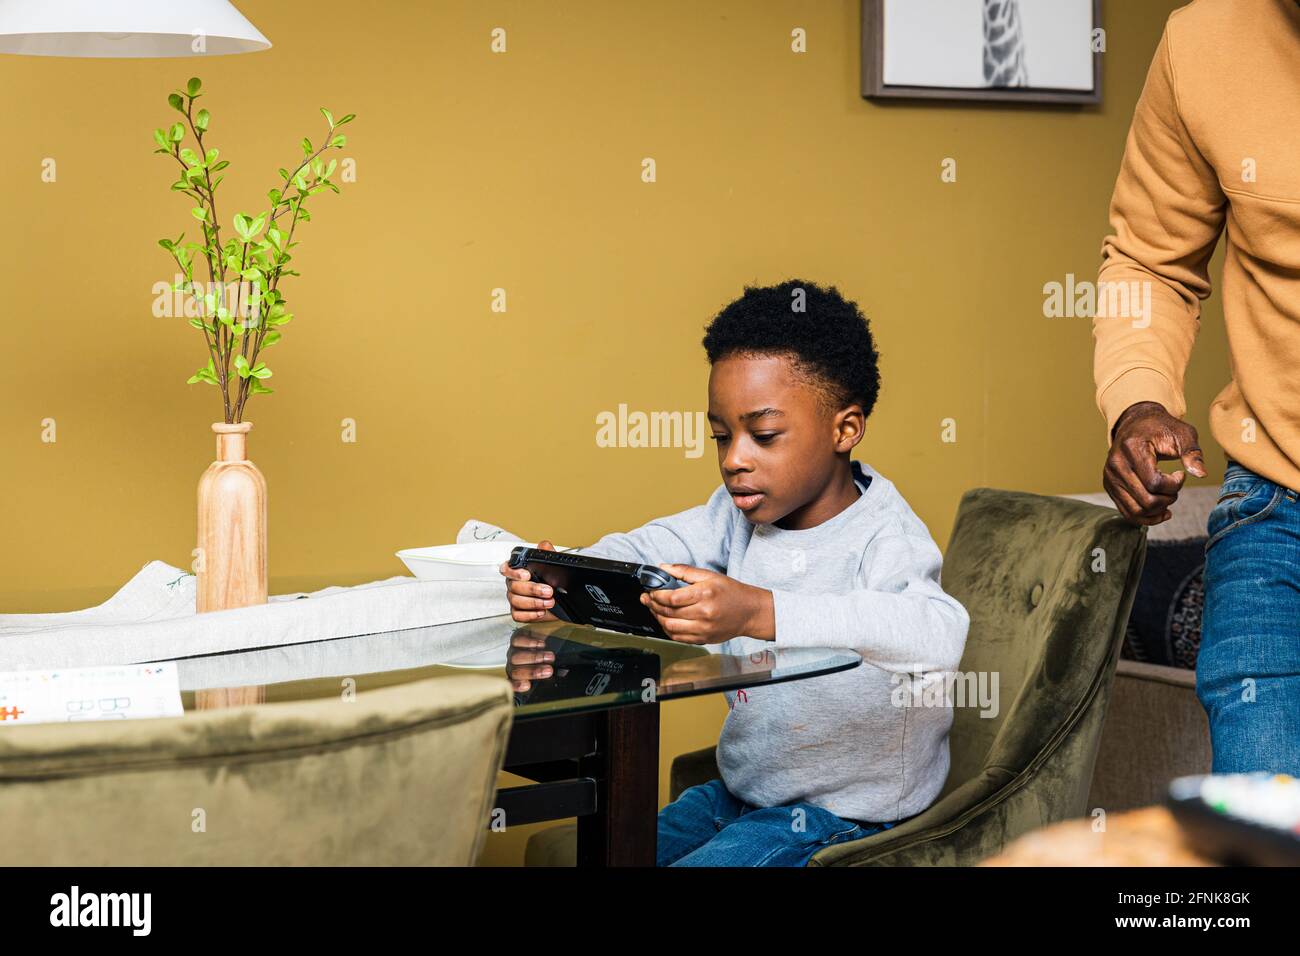 Boy using smart phone while sitting on chair at table Stock Photo